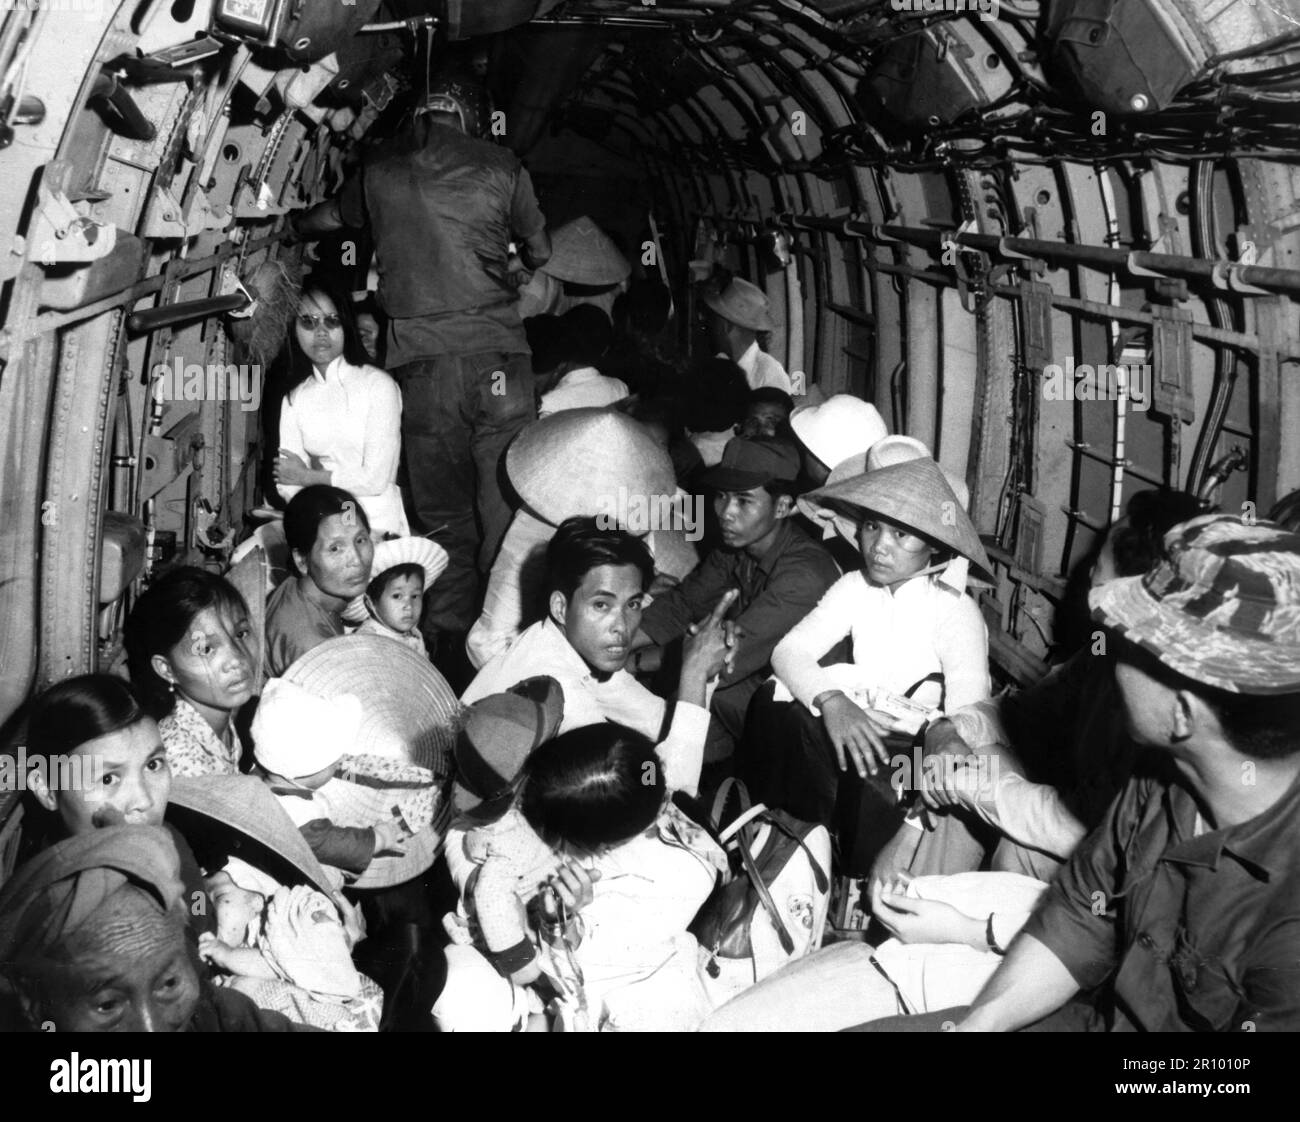 Stunned by the viciousness of a Viet Cong attack on their village, Vietnam war refugees ride a US Air Force helicopter to a safe area near Saigon.  March 1966. Stock Photo